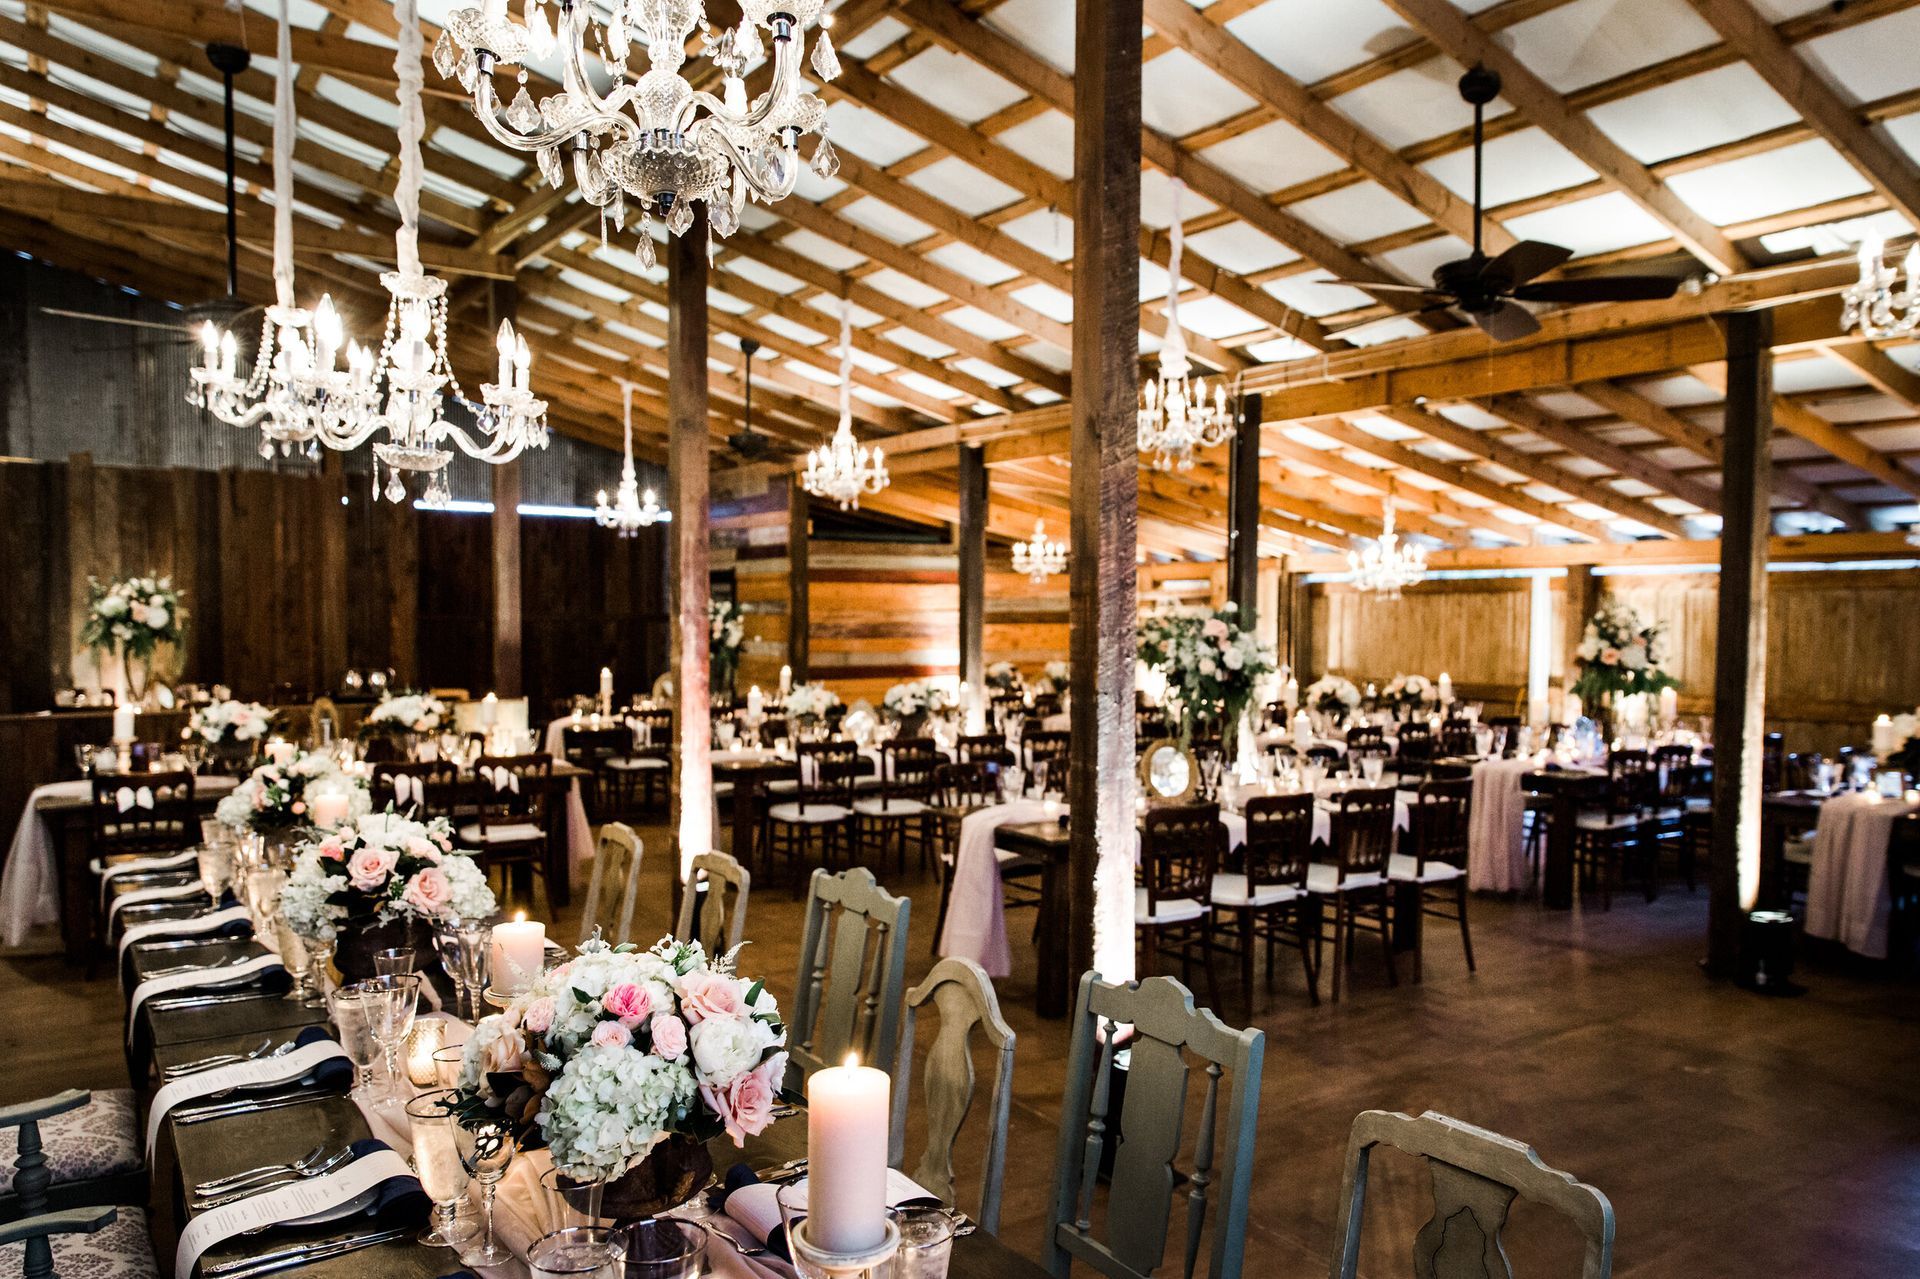 Heather & Ron's Wedding large room with tables and chairs set up for a wedding reception by Wedding Planner Nashville